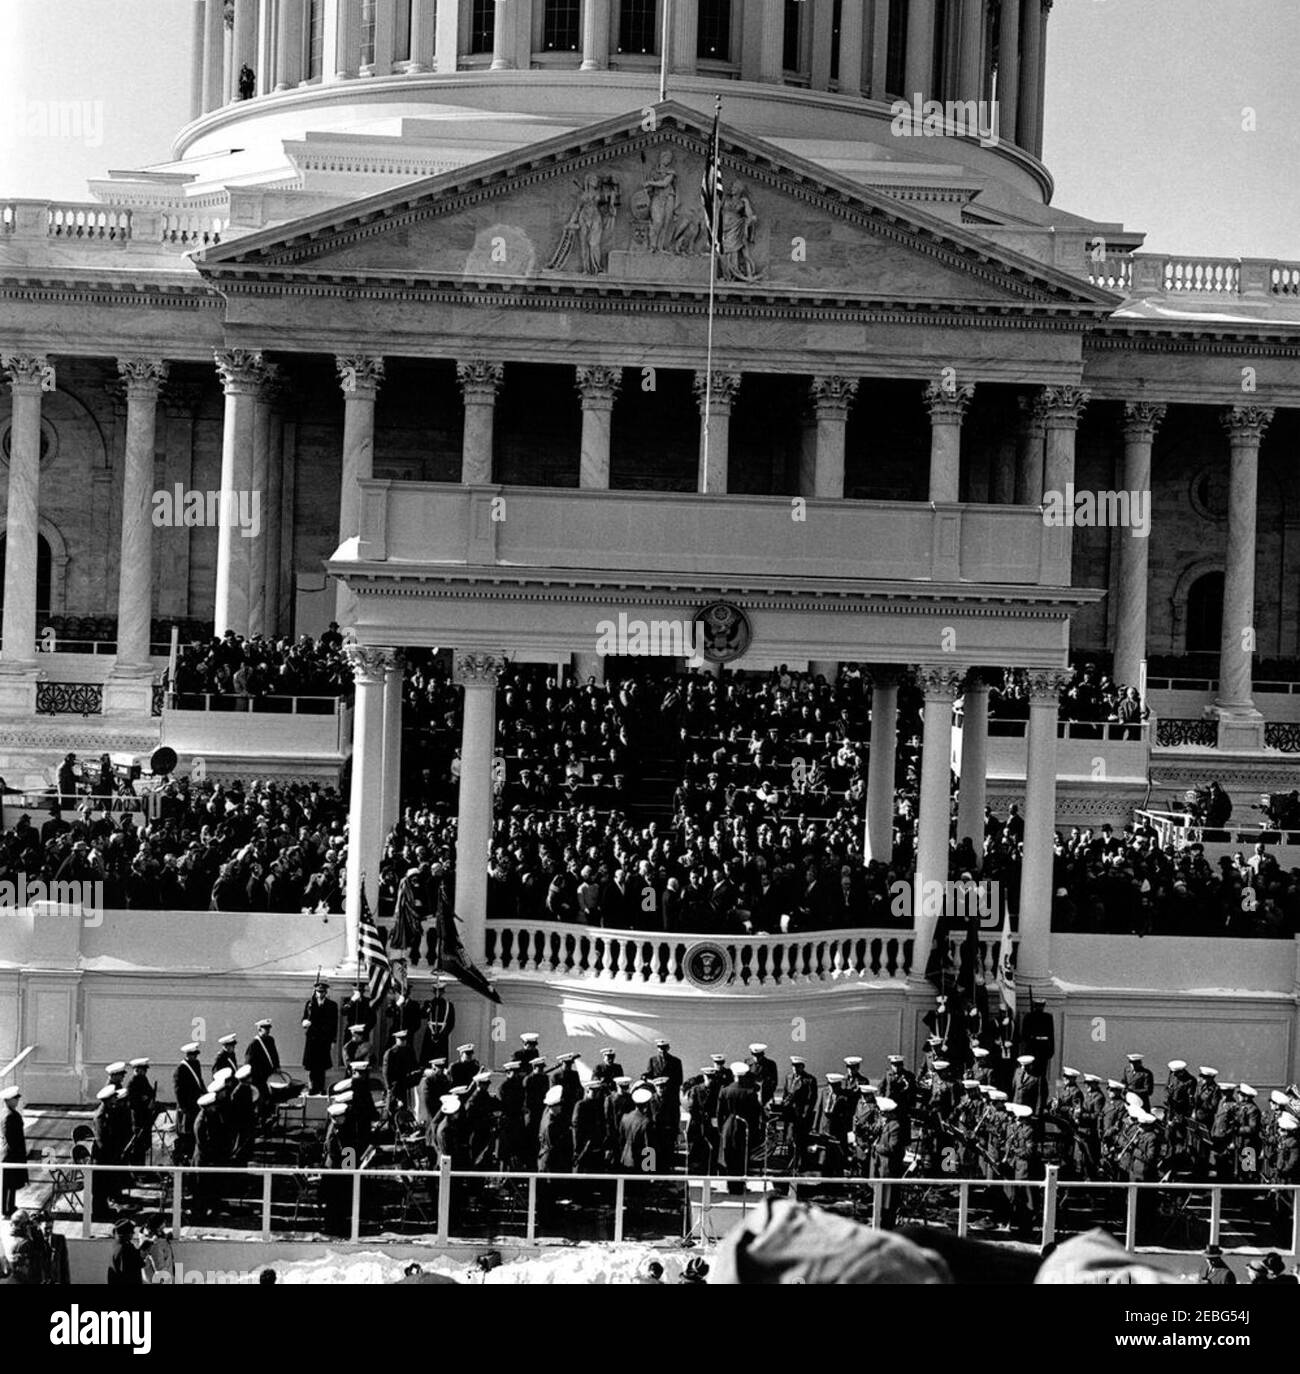 Inaugural ceremonies at U.S. Capitol, and Inaugural Parade. Inauguration of John F. Kennedy at East Portico, United States Capitol Building, Washington, D.C. Speaker of the House of Representatives Sam Rayburn administers oath of office to Vice President Lyndon B. Johnson. Looking on: President John F. Kennedy; former President Dwight D. Eisenhower; First Lady Jacqueline Kennedy; Lady Bird Johnson; former First Lady Mamie Eisenhower; Joseph P. Kennedy, Sr.; Rose Fitzgerald Kennedy; former Vice President Richard M. Nixon; former President Harry S. Truman; and former First Lady Bess Truman. Unit Stock Photo